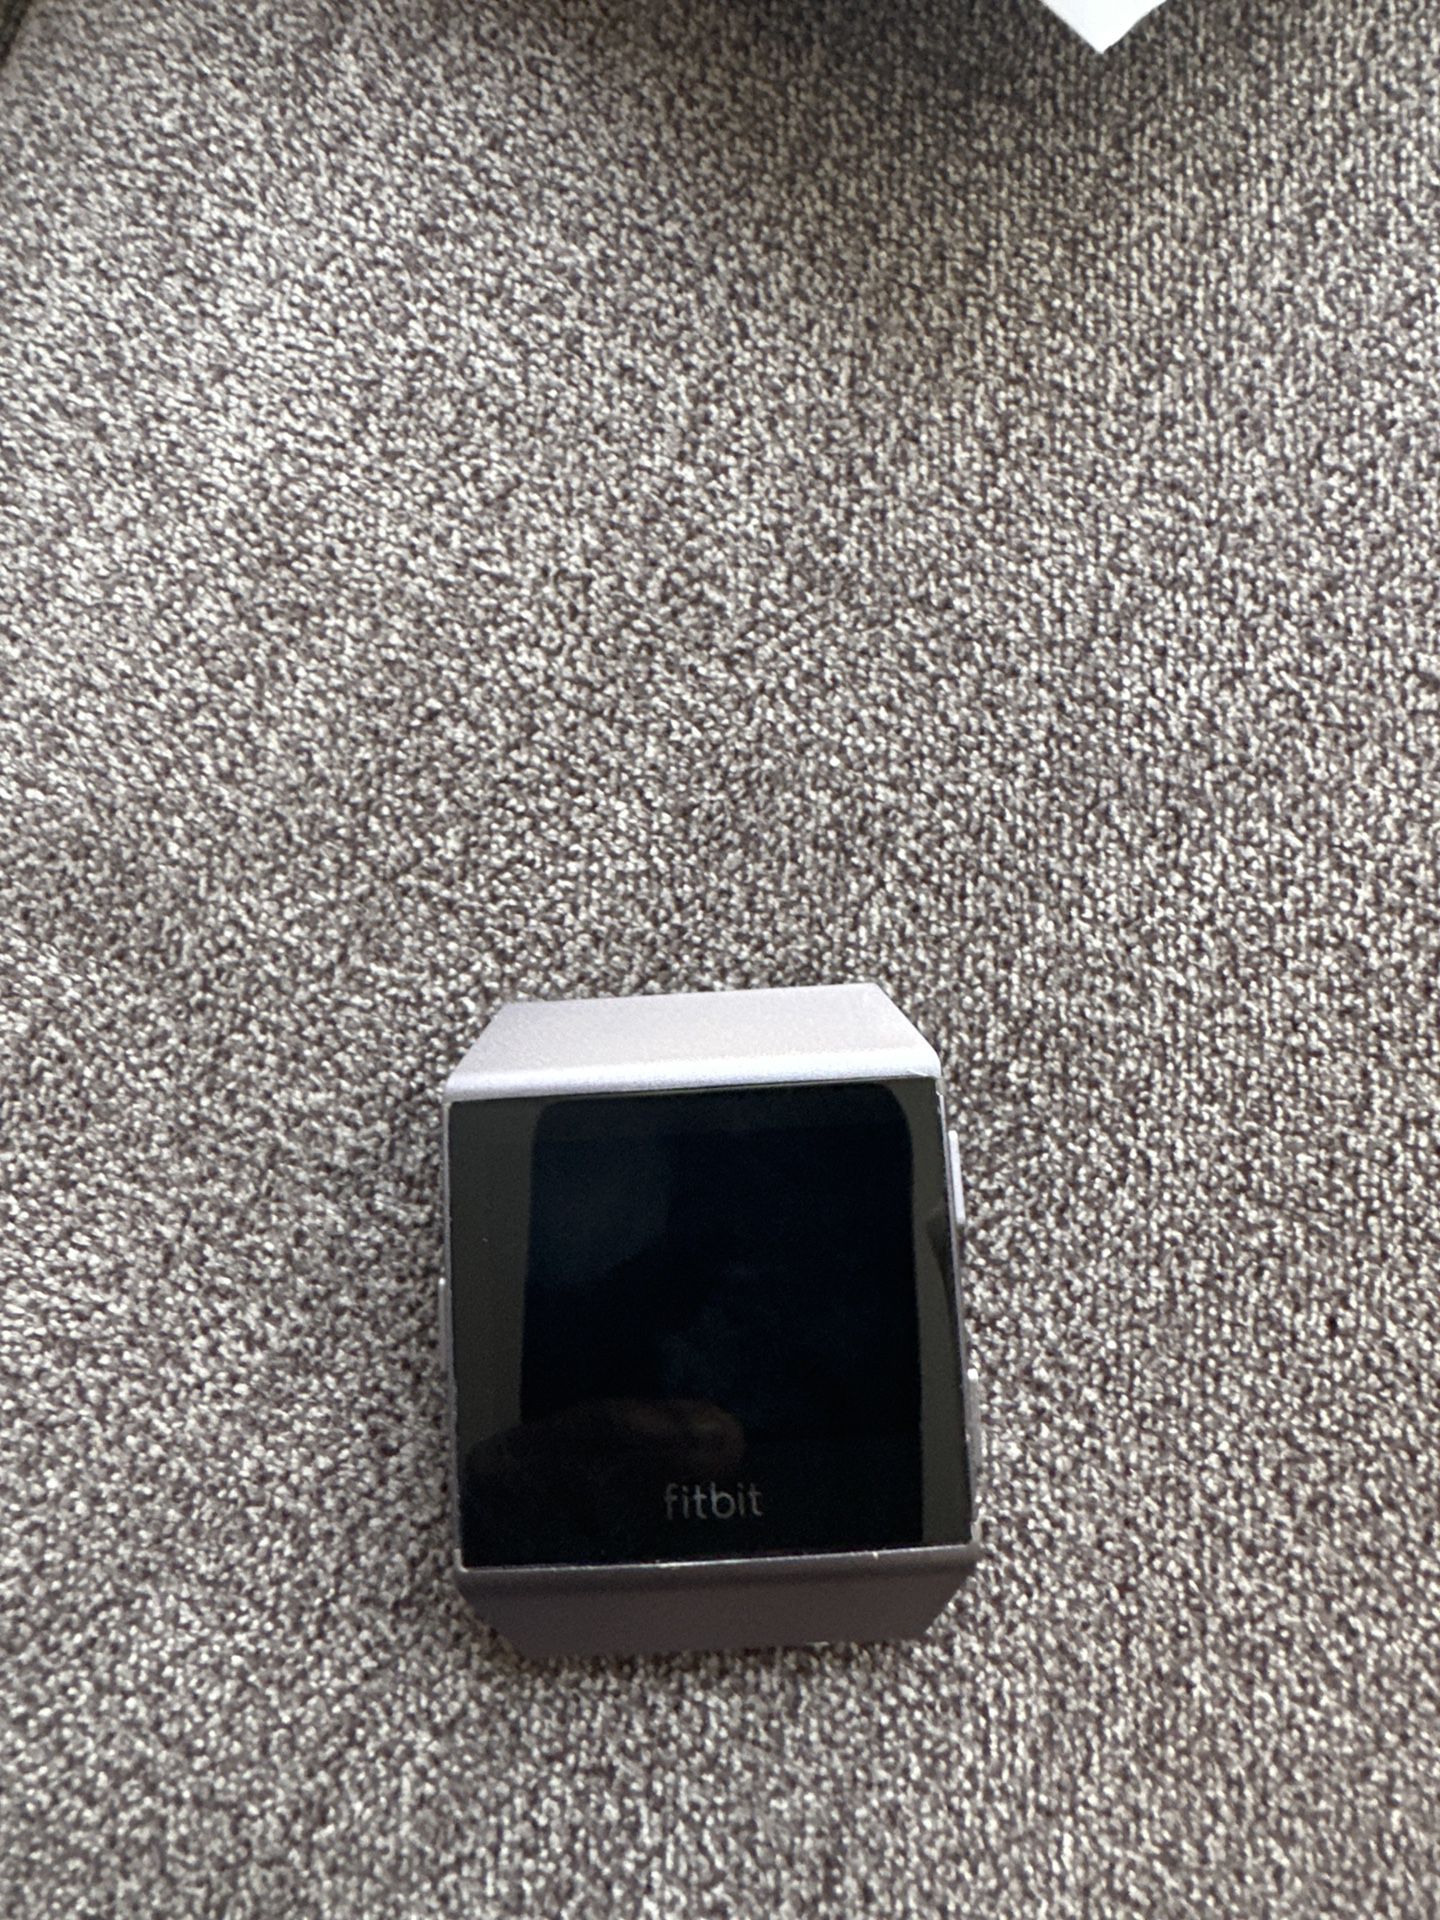 Fitbit (Ionic)Watches